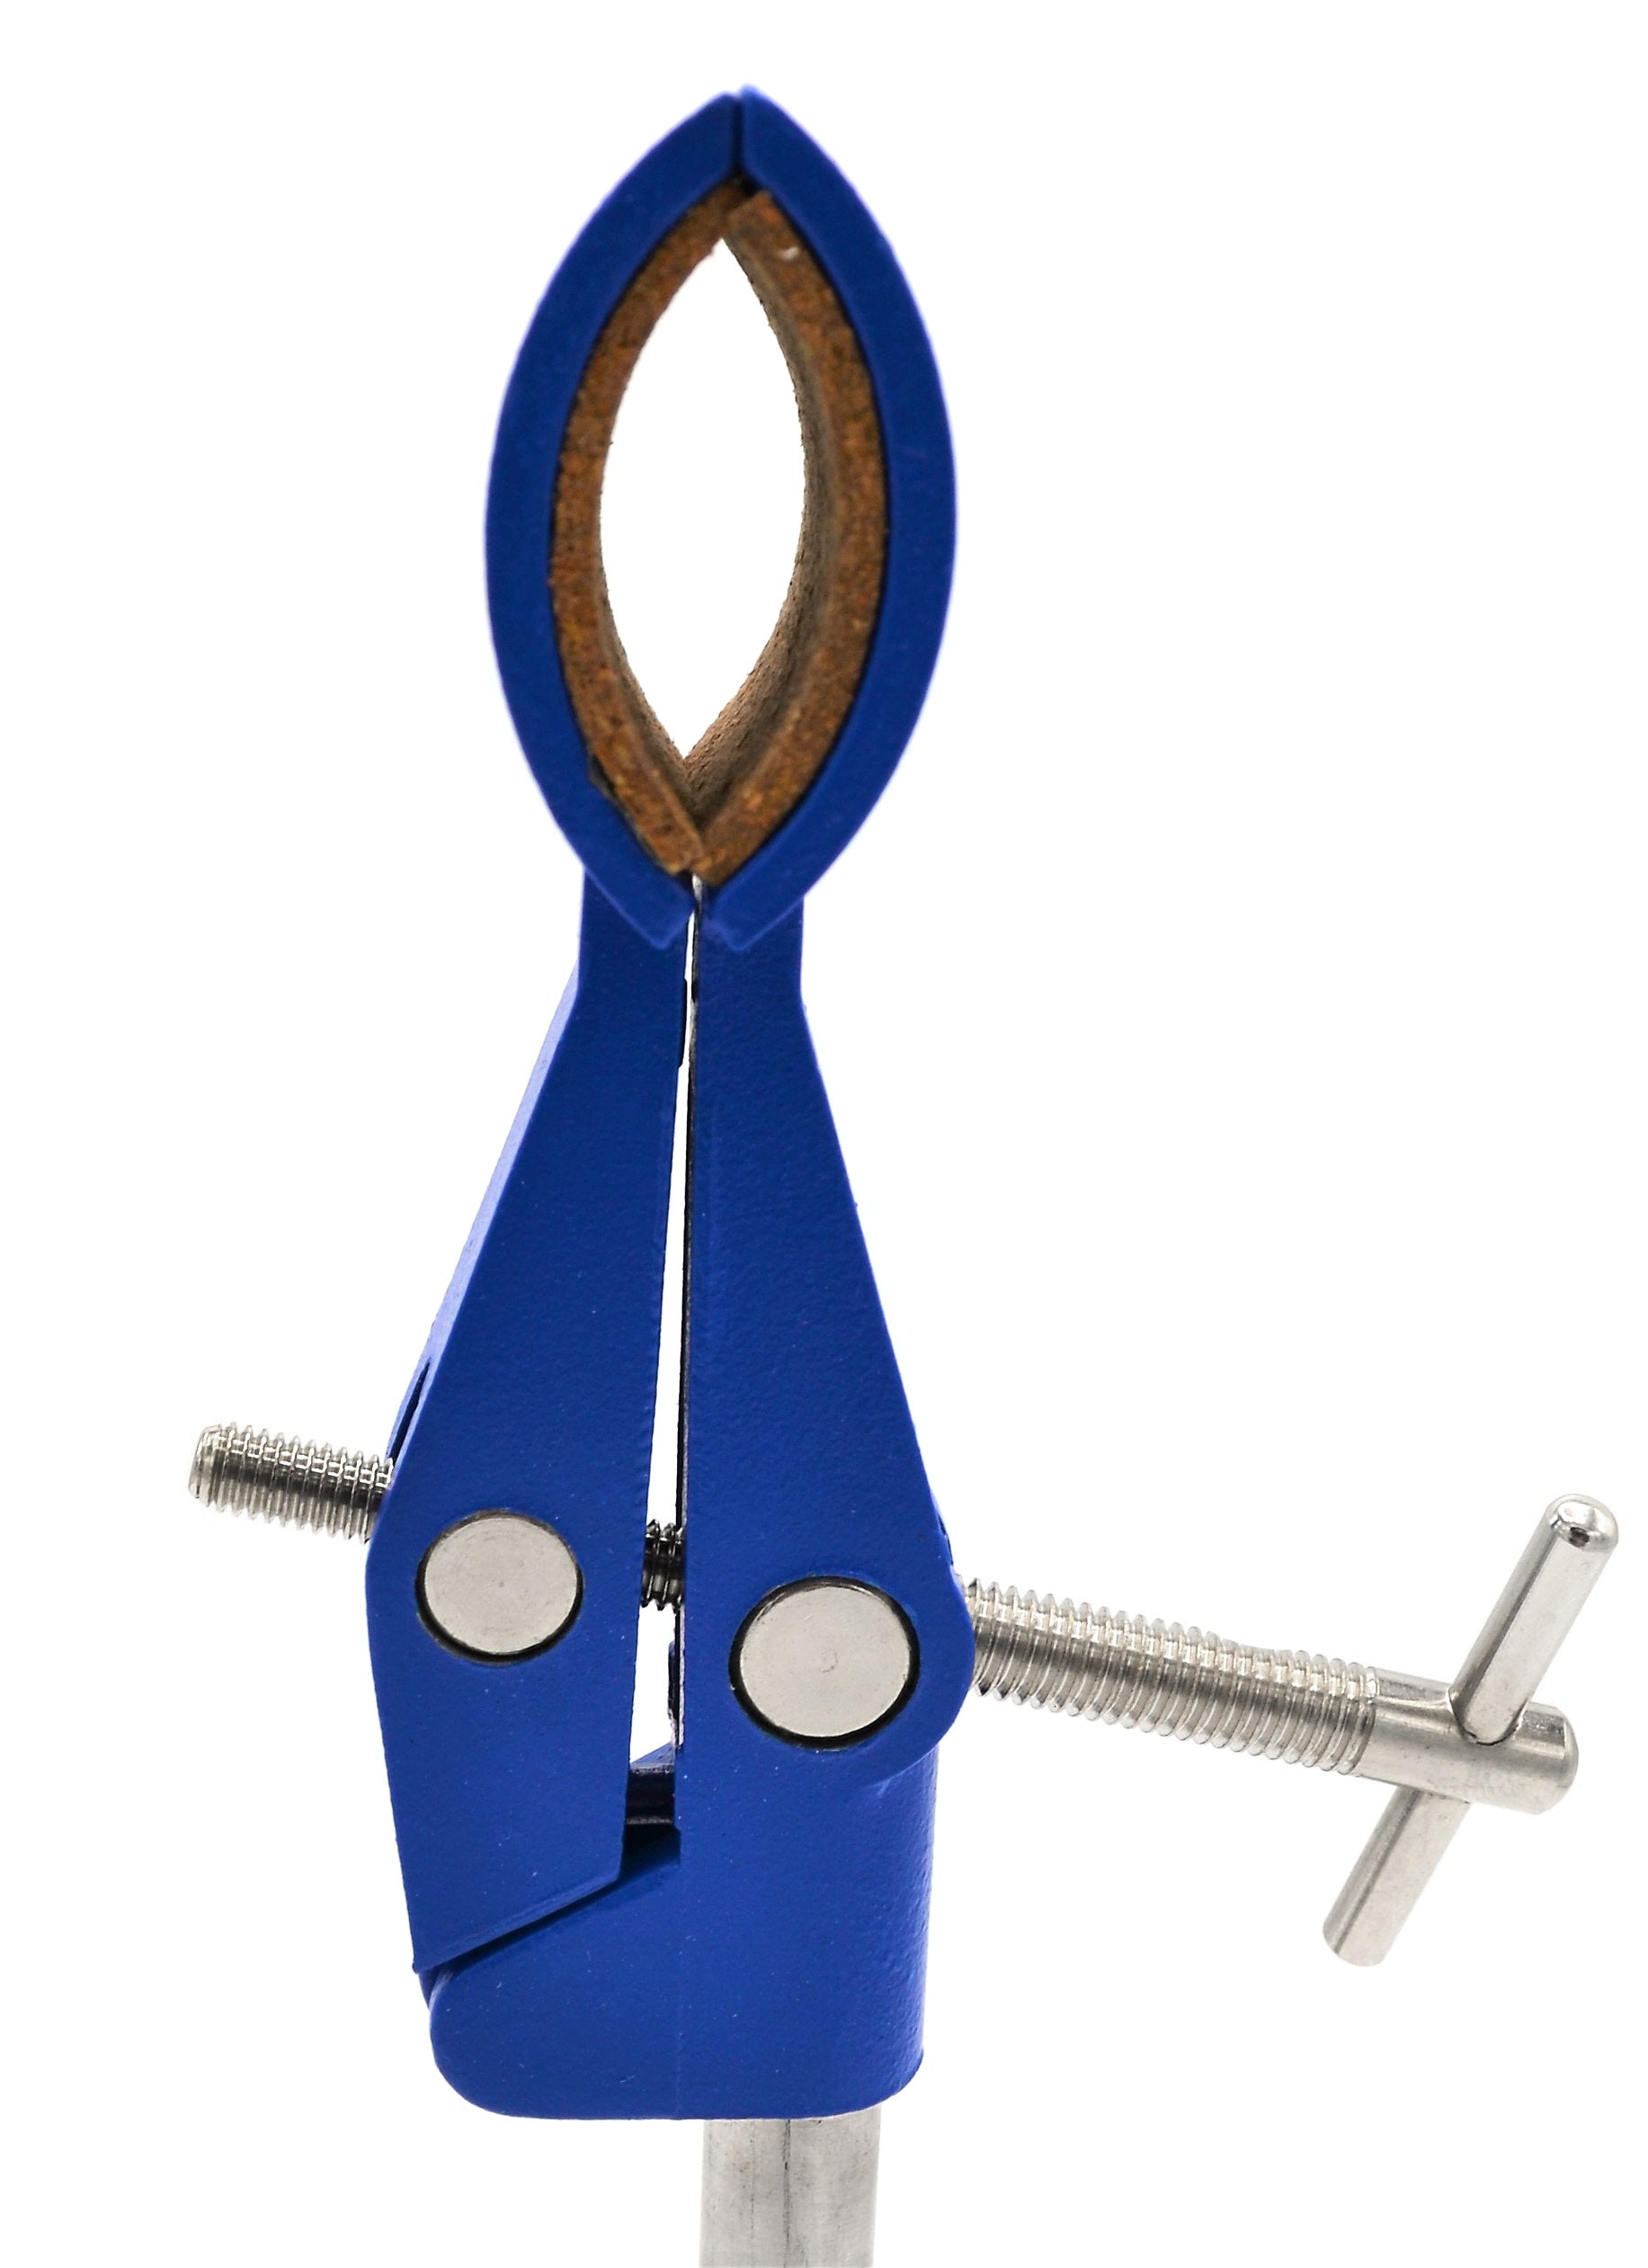 2 Prong, Cork Lined, Lab Clamp with Boss Head,  4.625" (11.7 cm) Maximum Clamp Opening